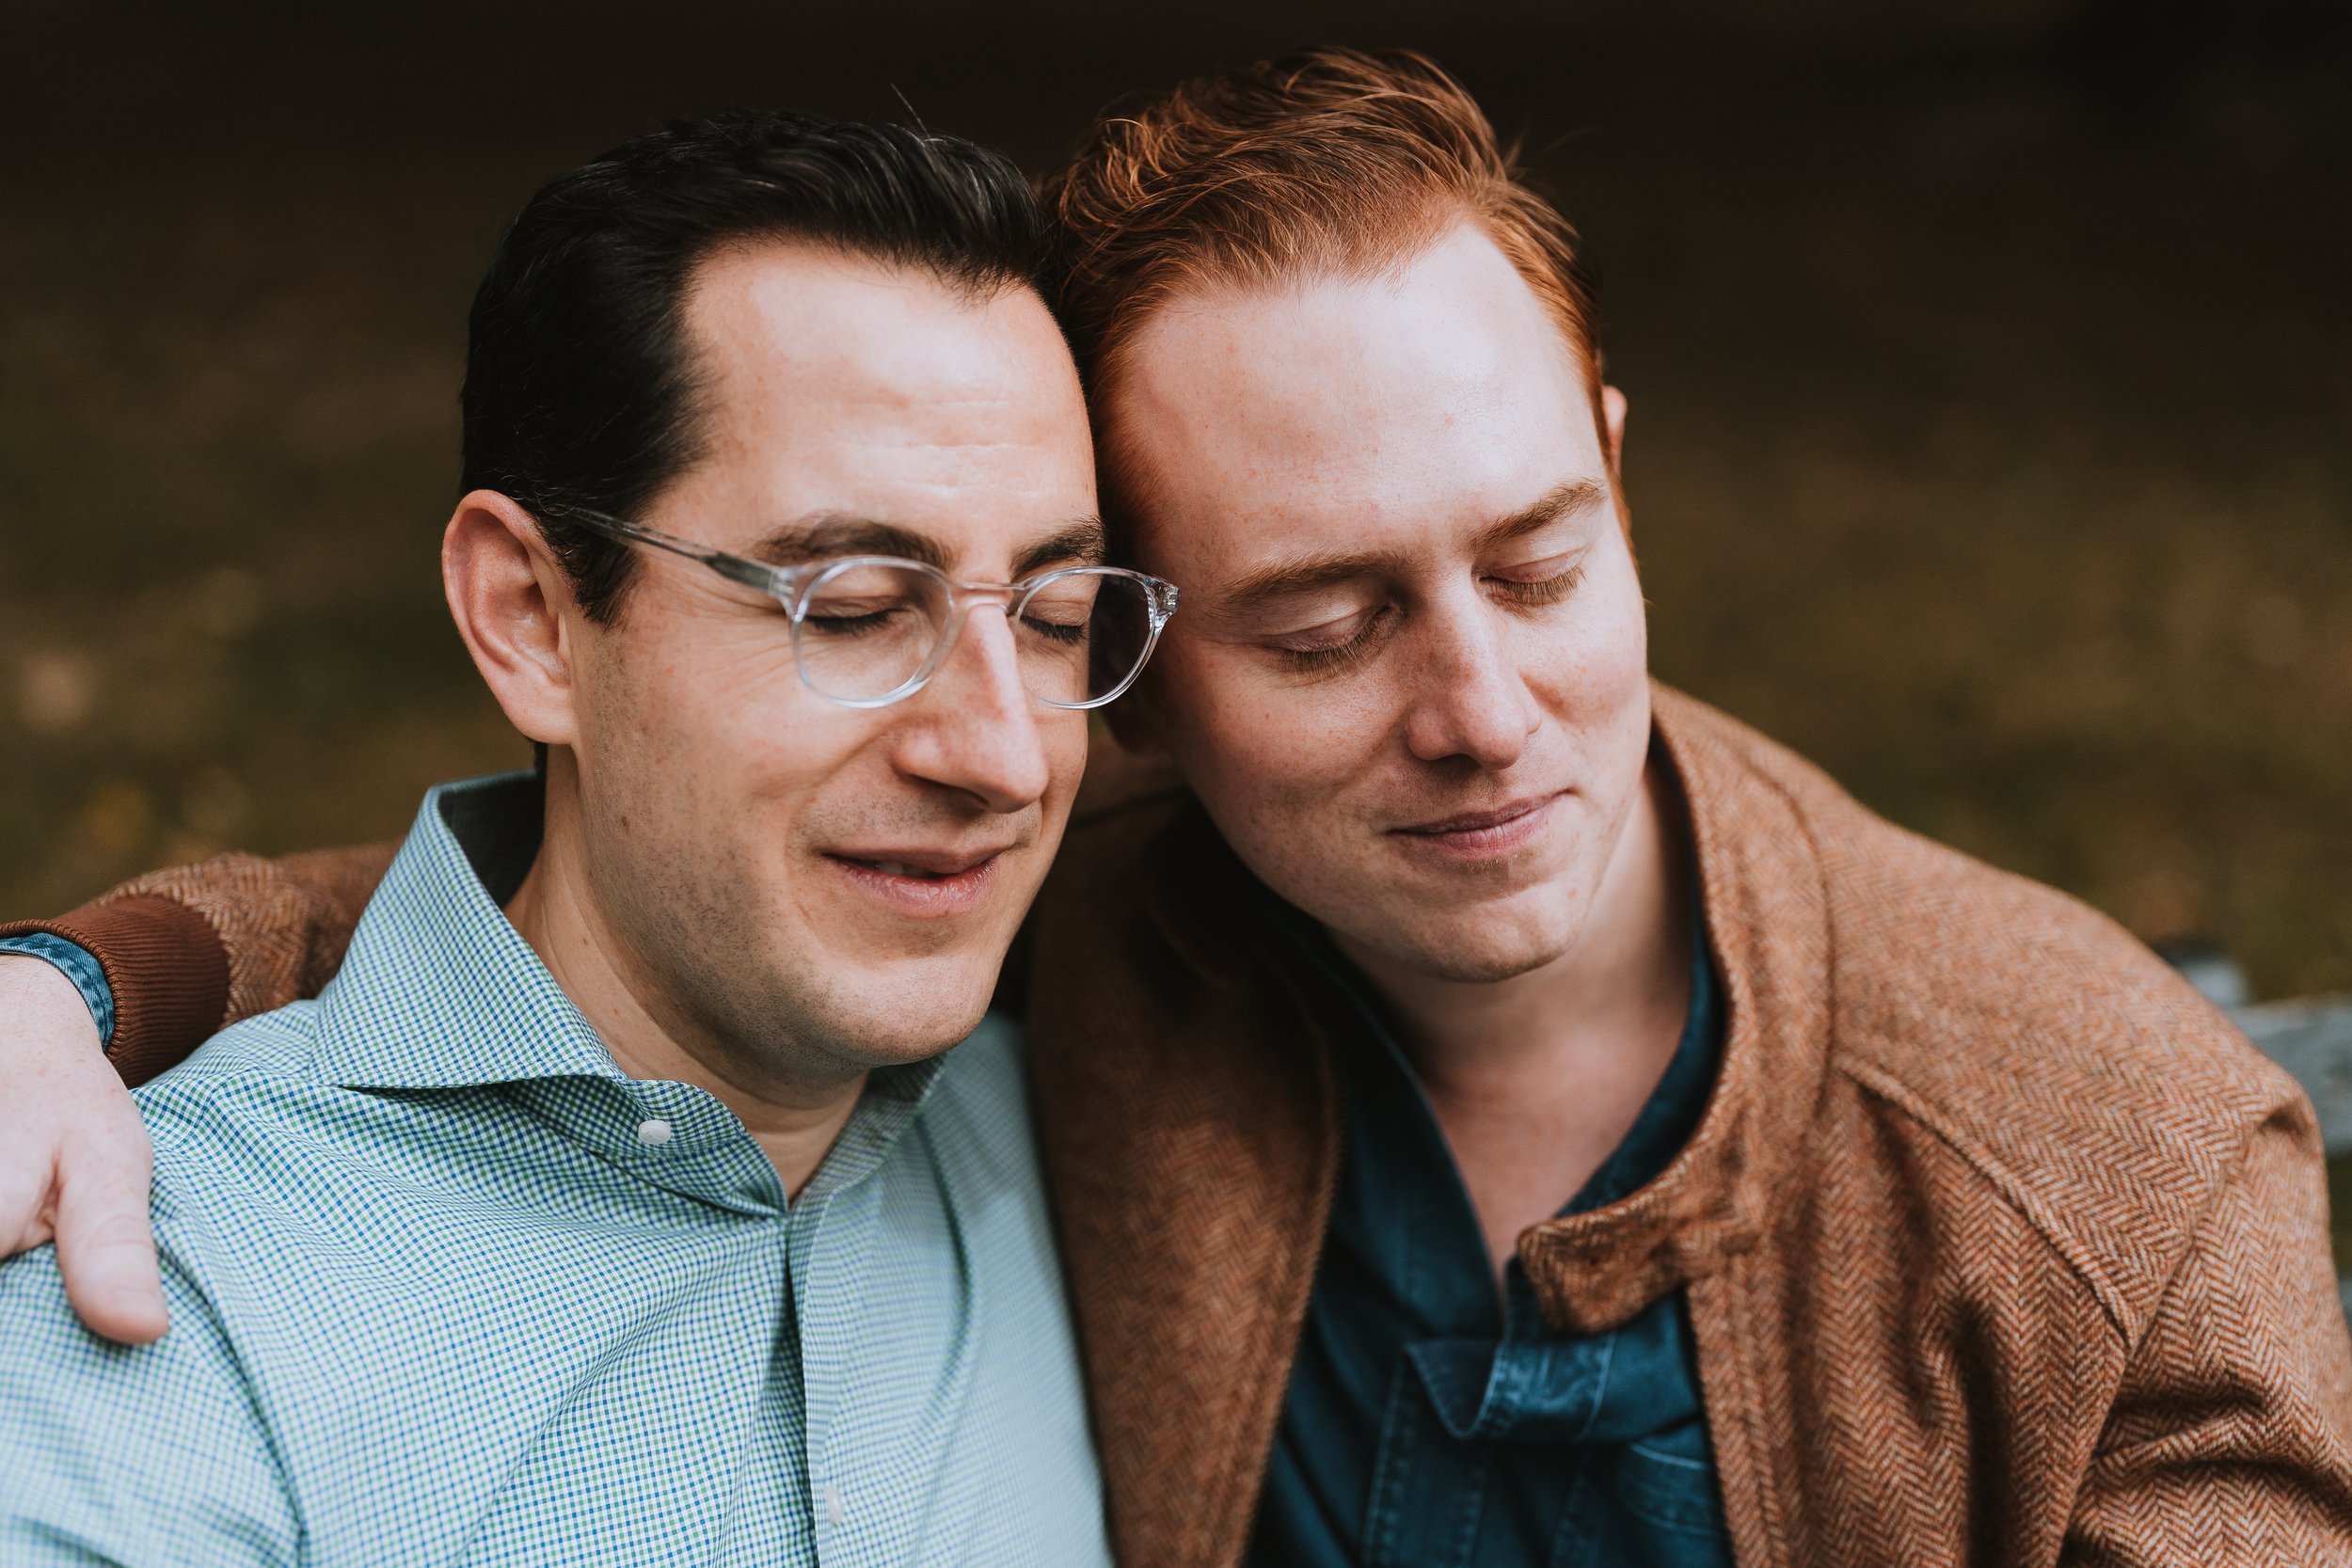 PARK SLOPE GAY ENGAGEMENT SHOOT